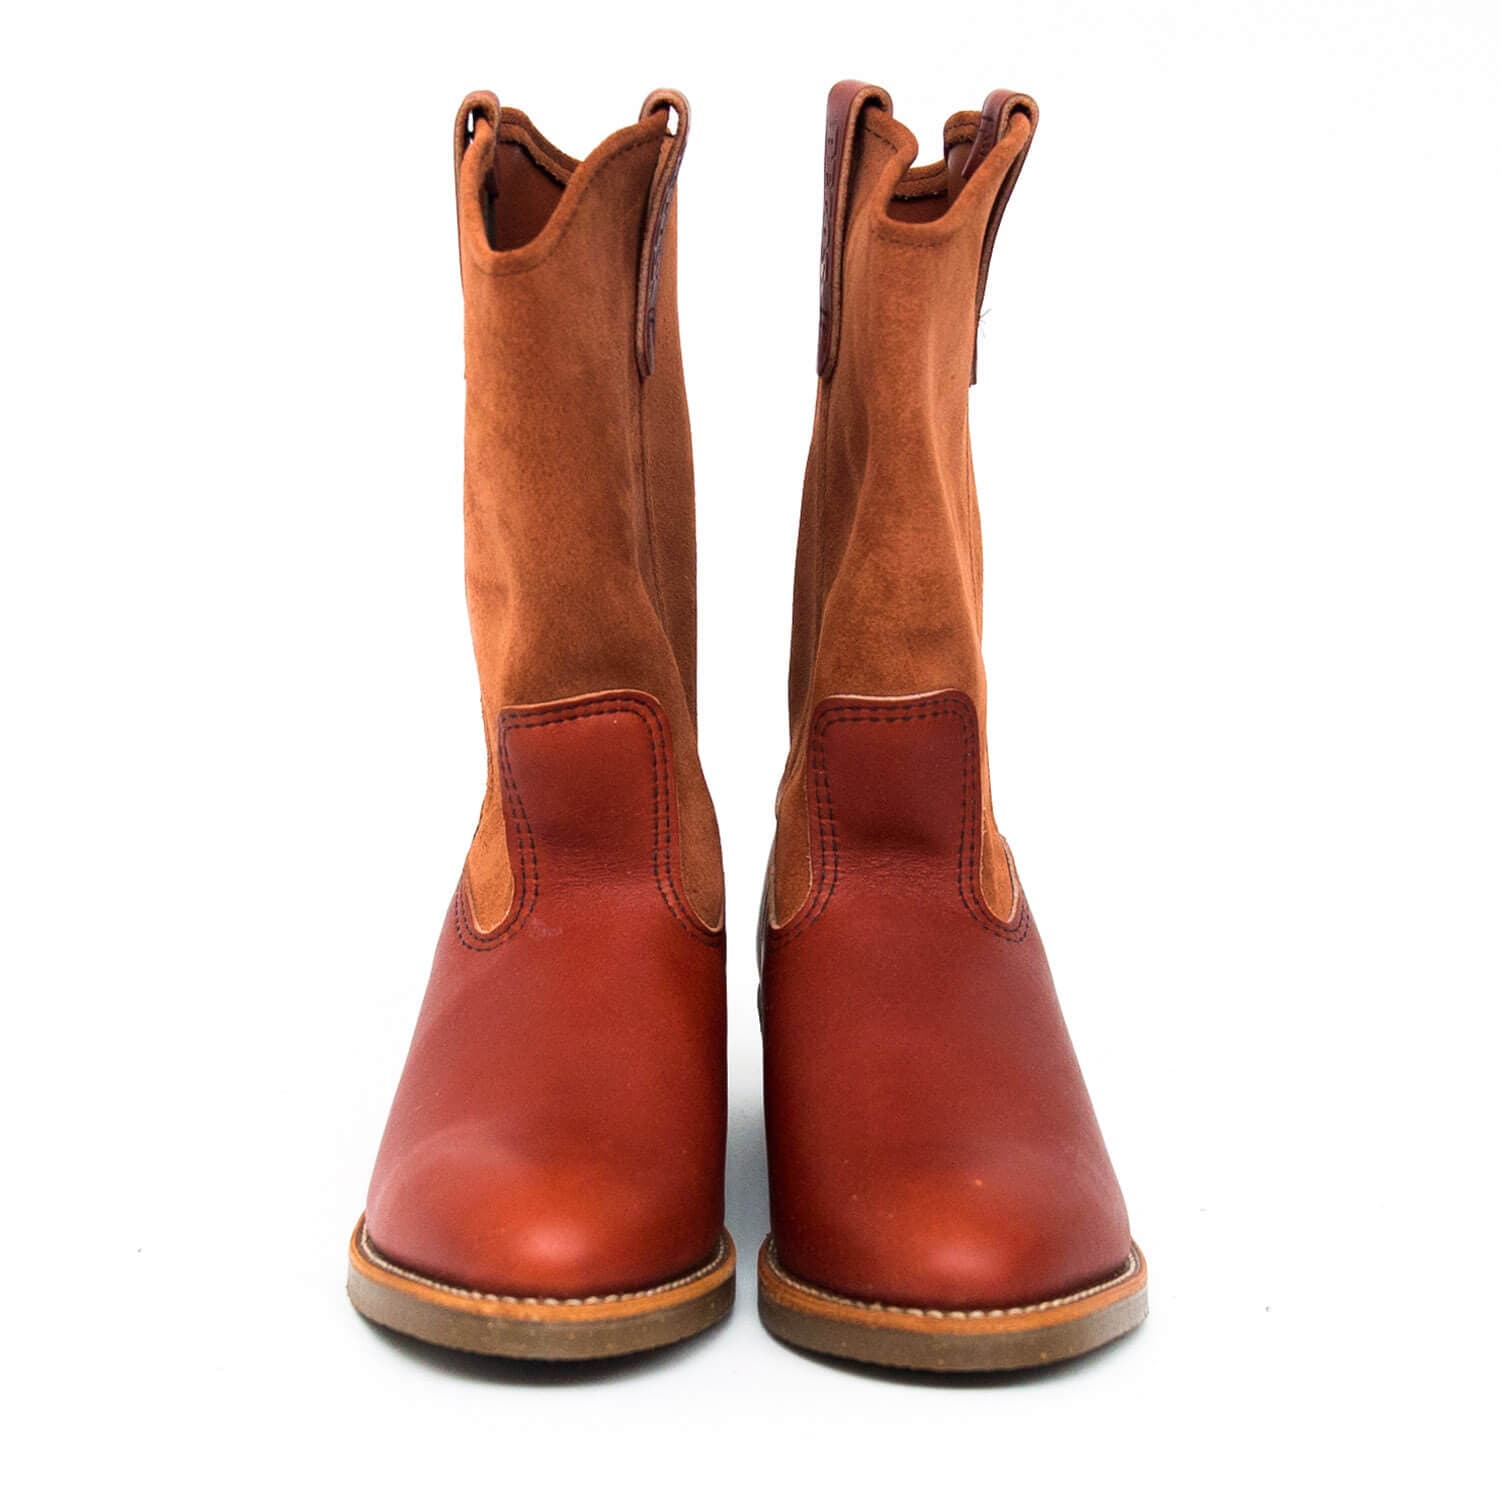 red wing pecos 227